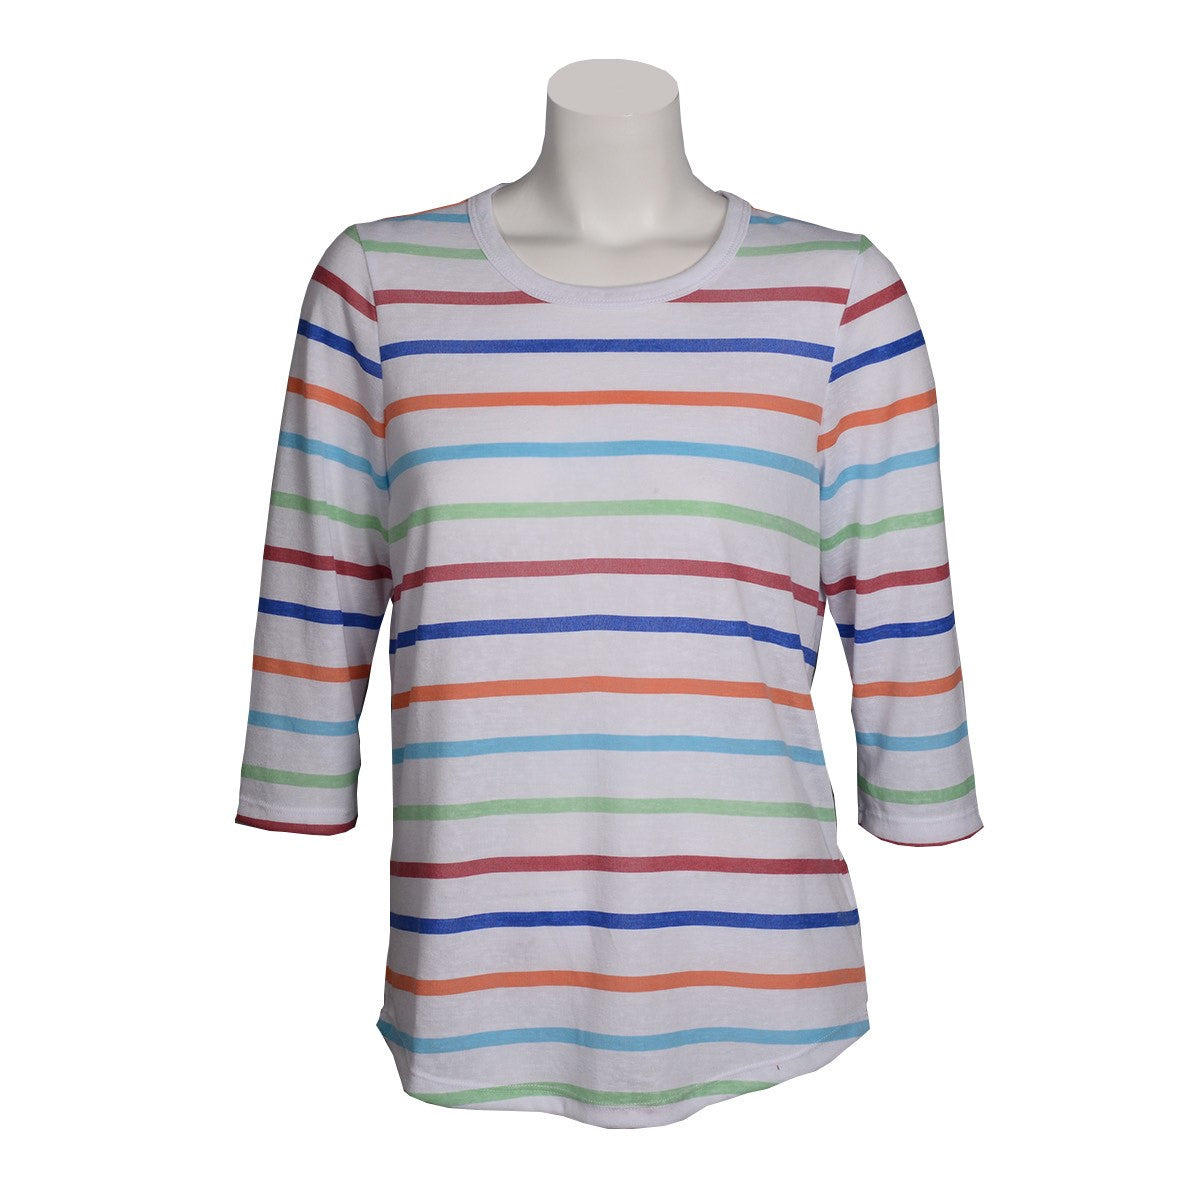 French Dressing Jeans (FDJ) Colorful Stripe Top With Back Button Detail